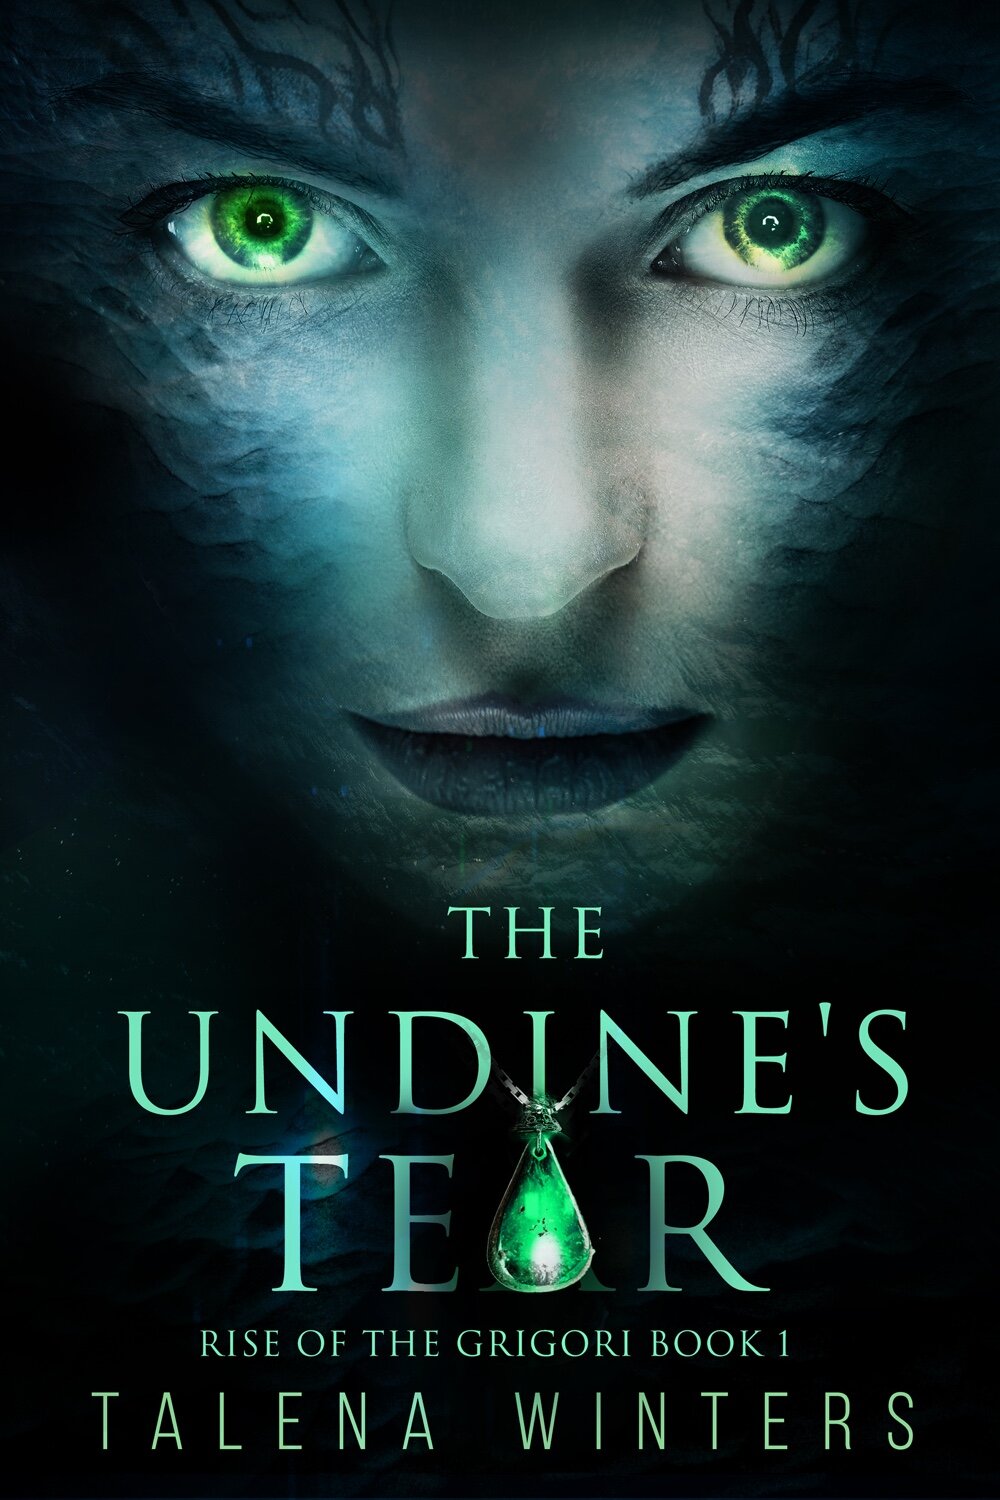 Original cover for The Undine's Tear with the Tear in the title